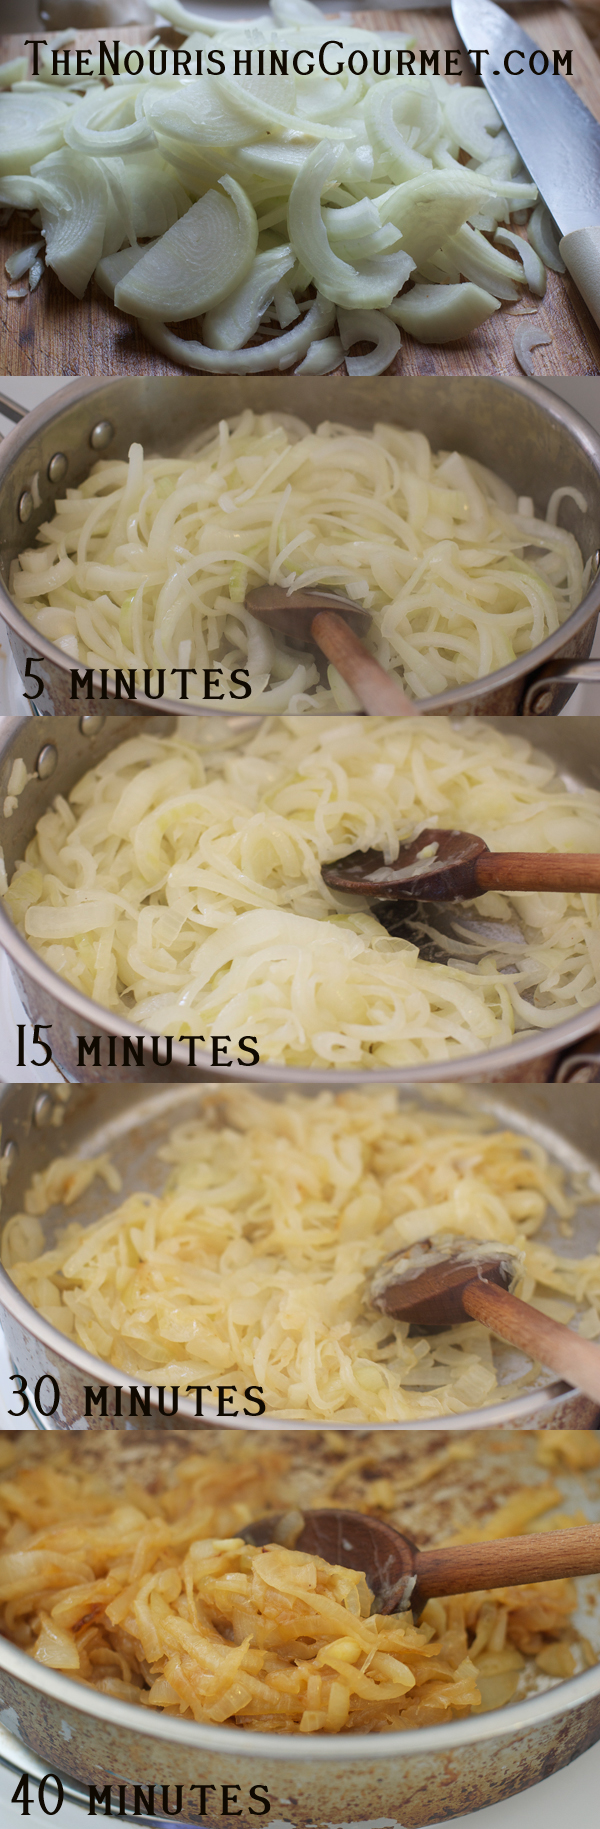 How to Caramelize Onions!